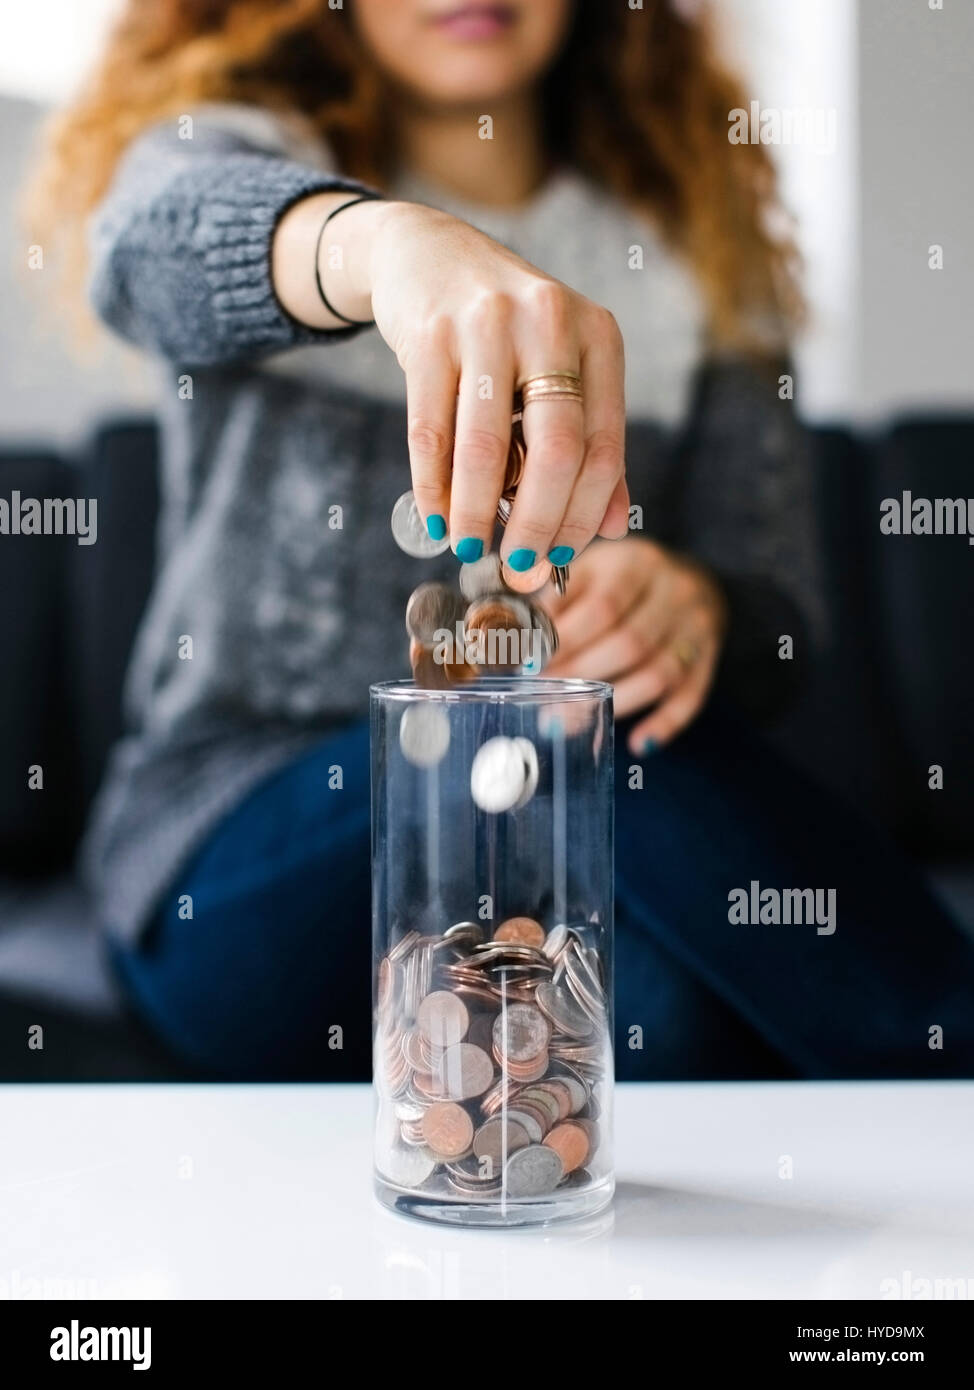 Woman dropping coins into glass container Stock Photo